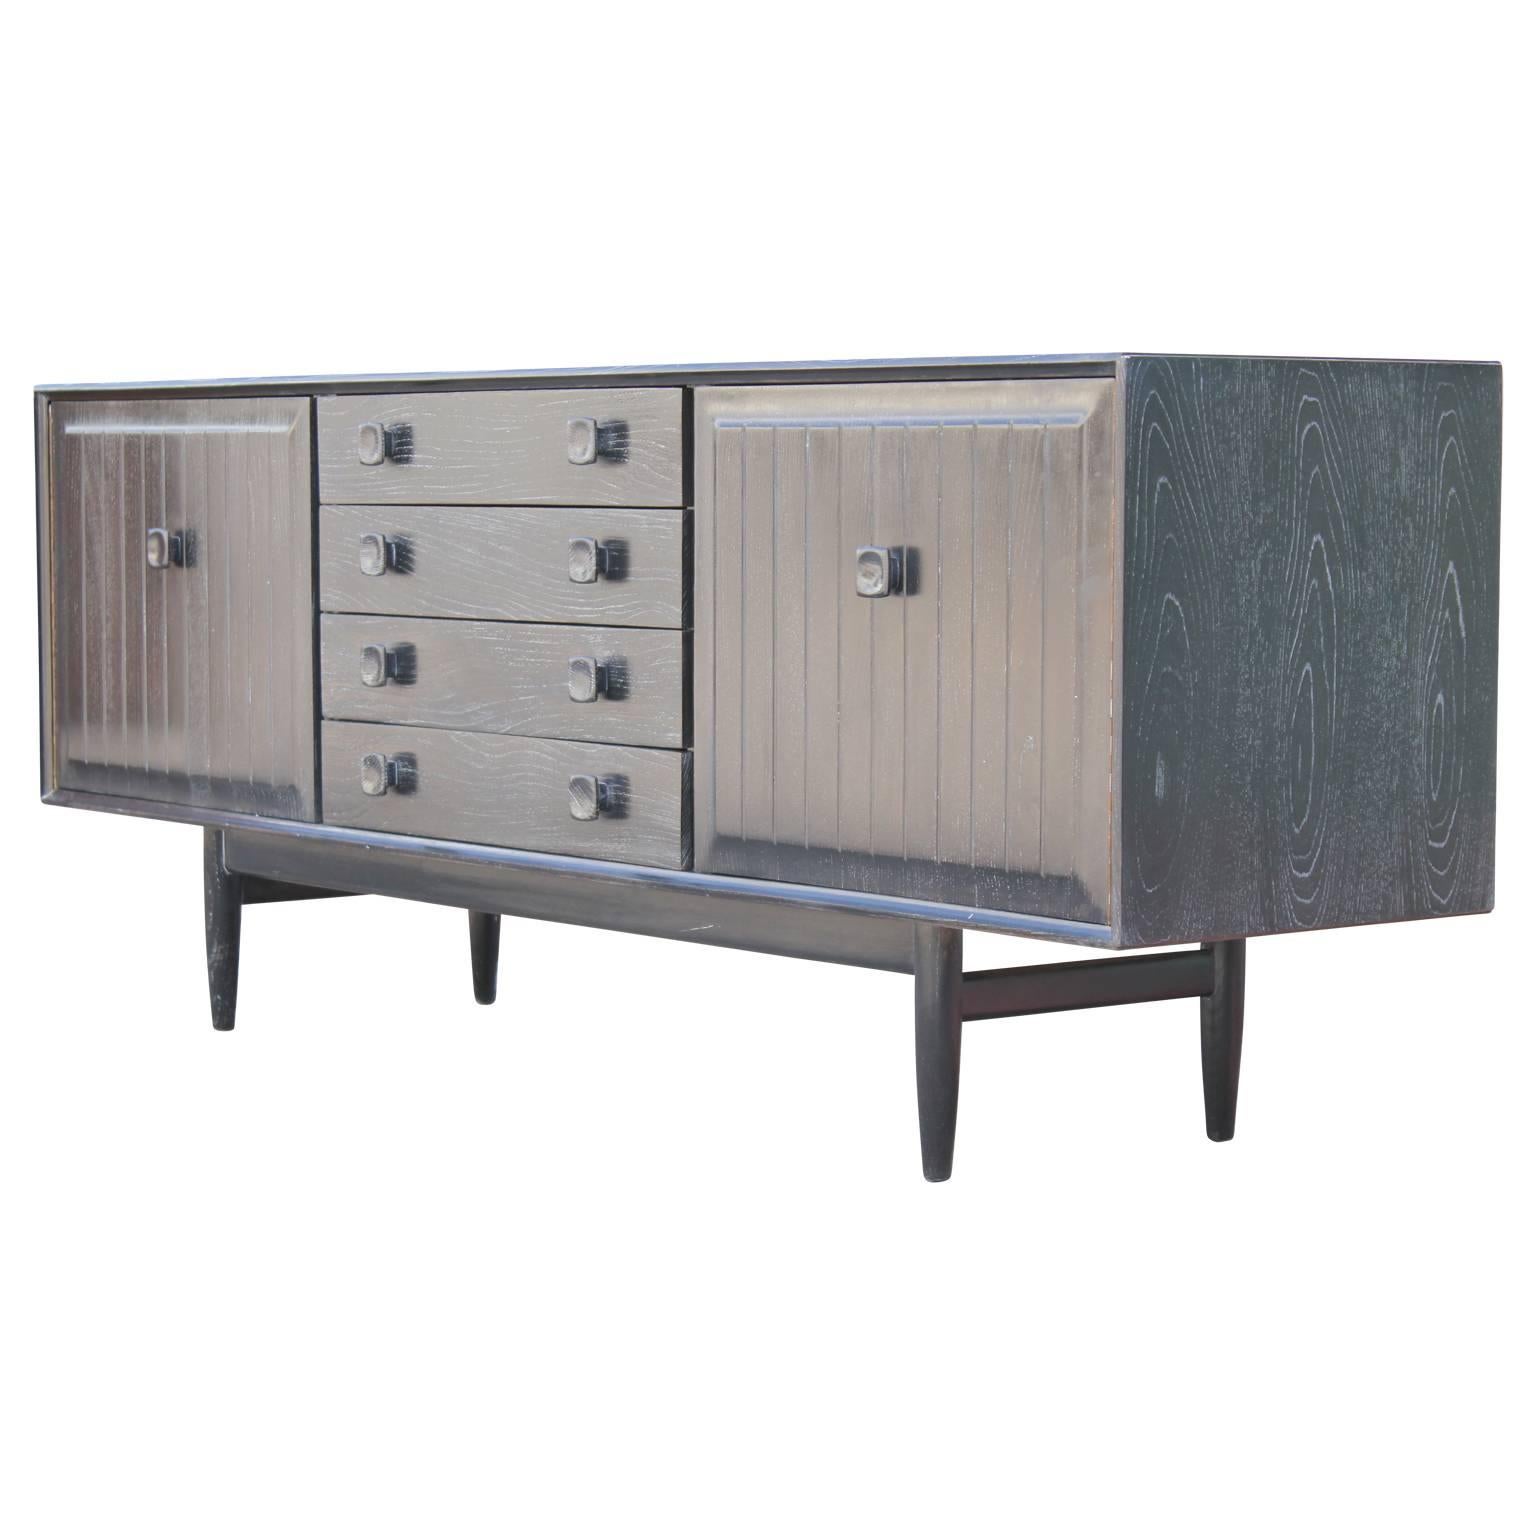 Mid-Century Modern Modern Four-Drawer Credenza / Sideboard with a Cerused Finish